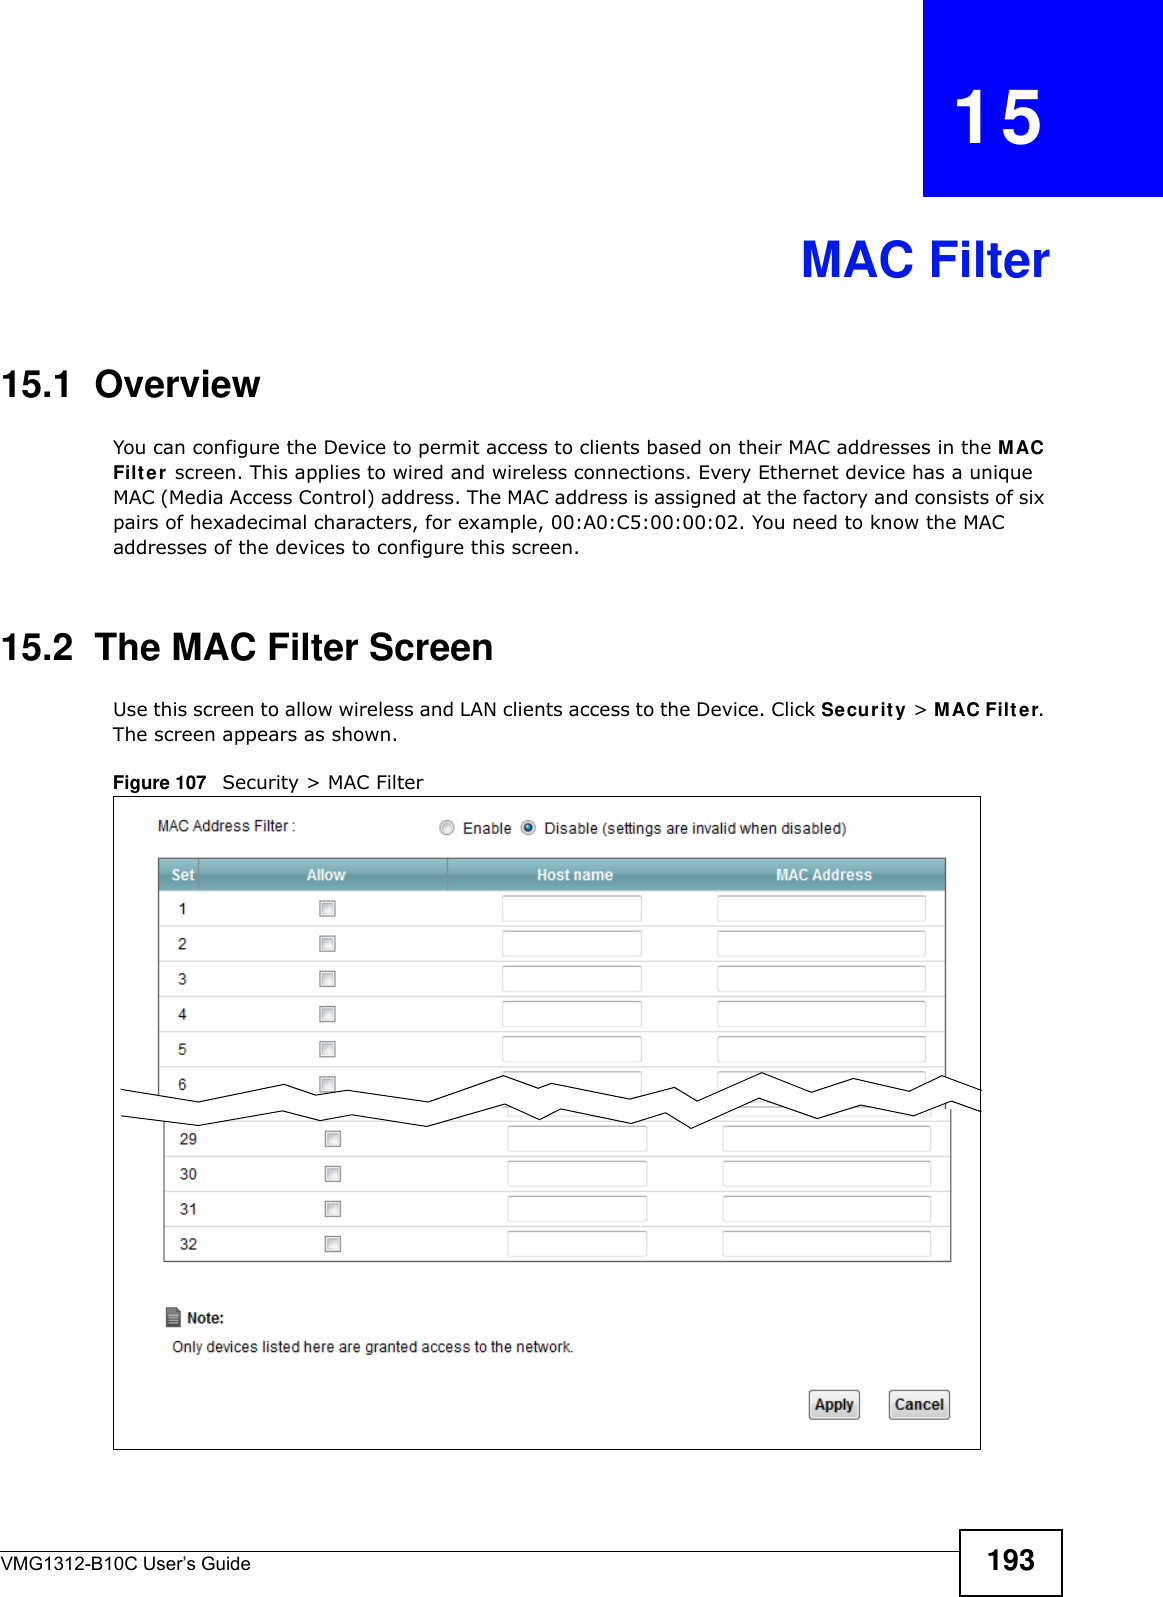 VMG1312-B10C User’s Guide 193CHAPTER   15MAC Filter15.1  Overview You can configure the Device to permit access to clients based on their MAC addresses in the MAC Filt e r  screen. This applies to wired and wireless connections. Every Ethernet device has a unique MAC (Media Access Control) address. The MAC address is assigned at the factory and consists of six pairs of hexadecimal characters, for example, 00:A0:C5:00:00:02. You need to know the MAC addresses of the devices to configure this screen.15.2  The MAC Filter ScreenUse this screen to allow wireless and LAN clients access to the Device. Click Secur it y &gt; MAC Filt e r. The screen appears as shown.Figure 107   Security &gt; MAC Filter